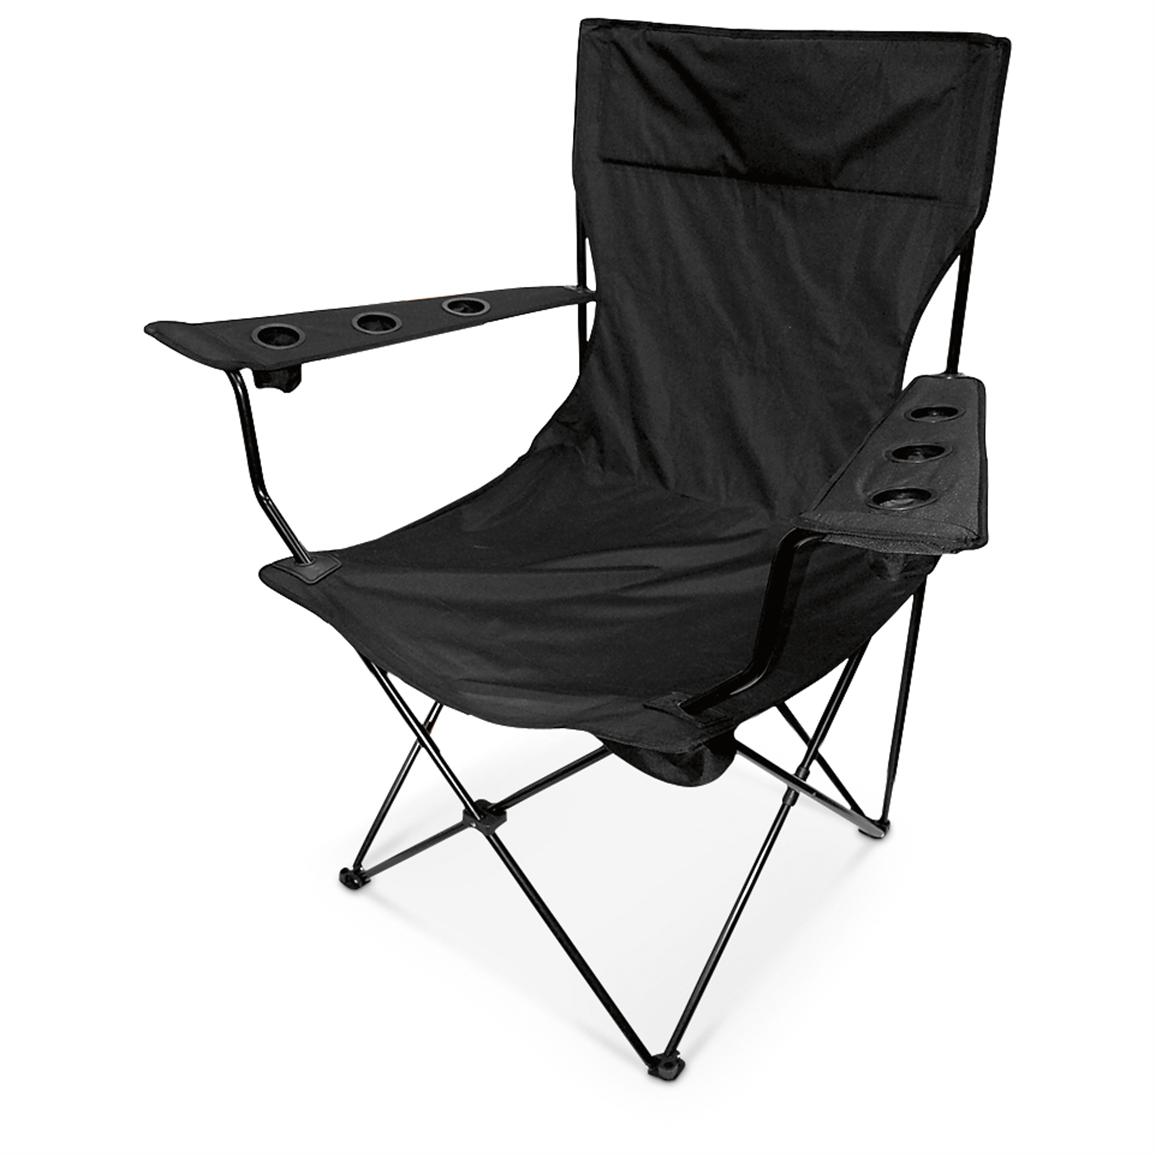 Giant Camp Chair, Black 203730, Patio Furniture at